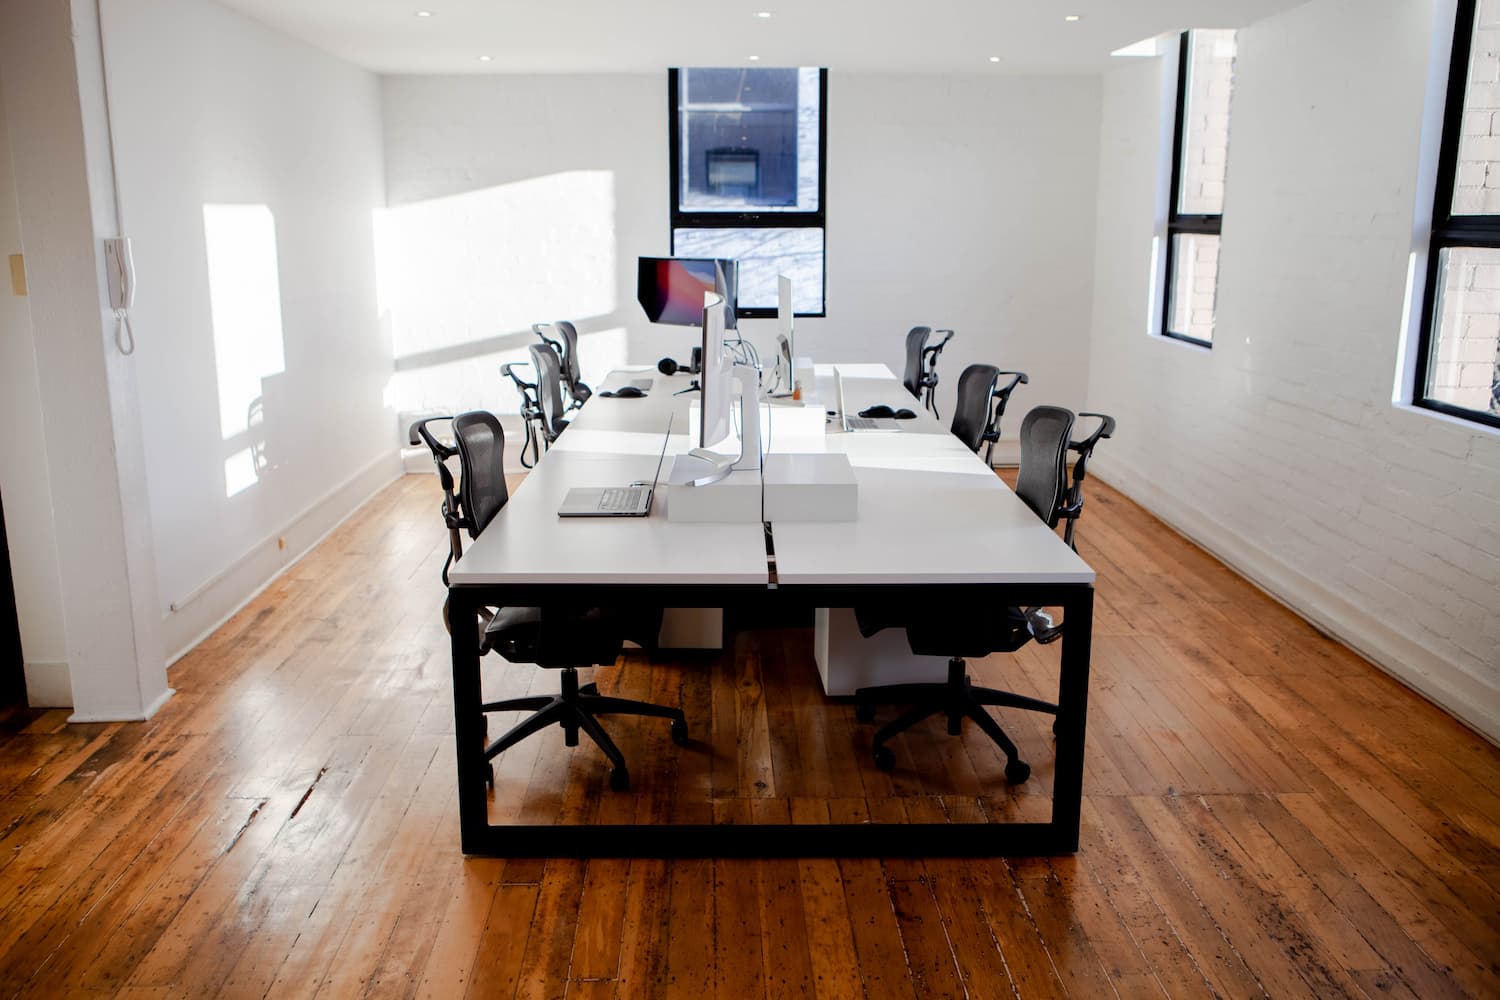 A modern office meeting room featuring a large white table with chairs around it, an iMac at one end, surrounded by white walls, large windows, and a hardwood floor.